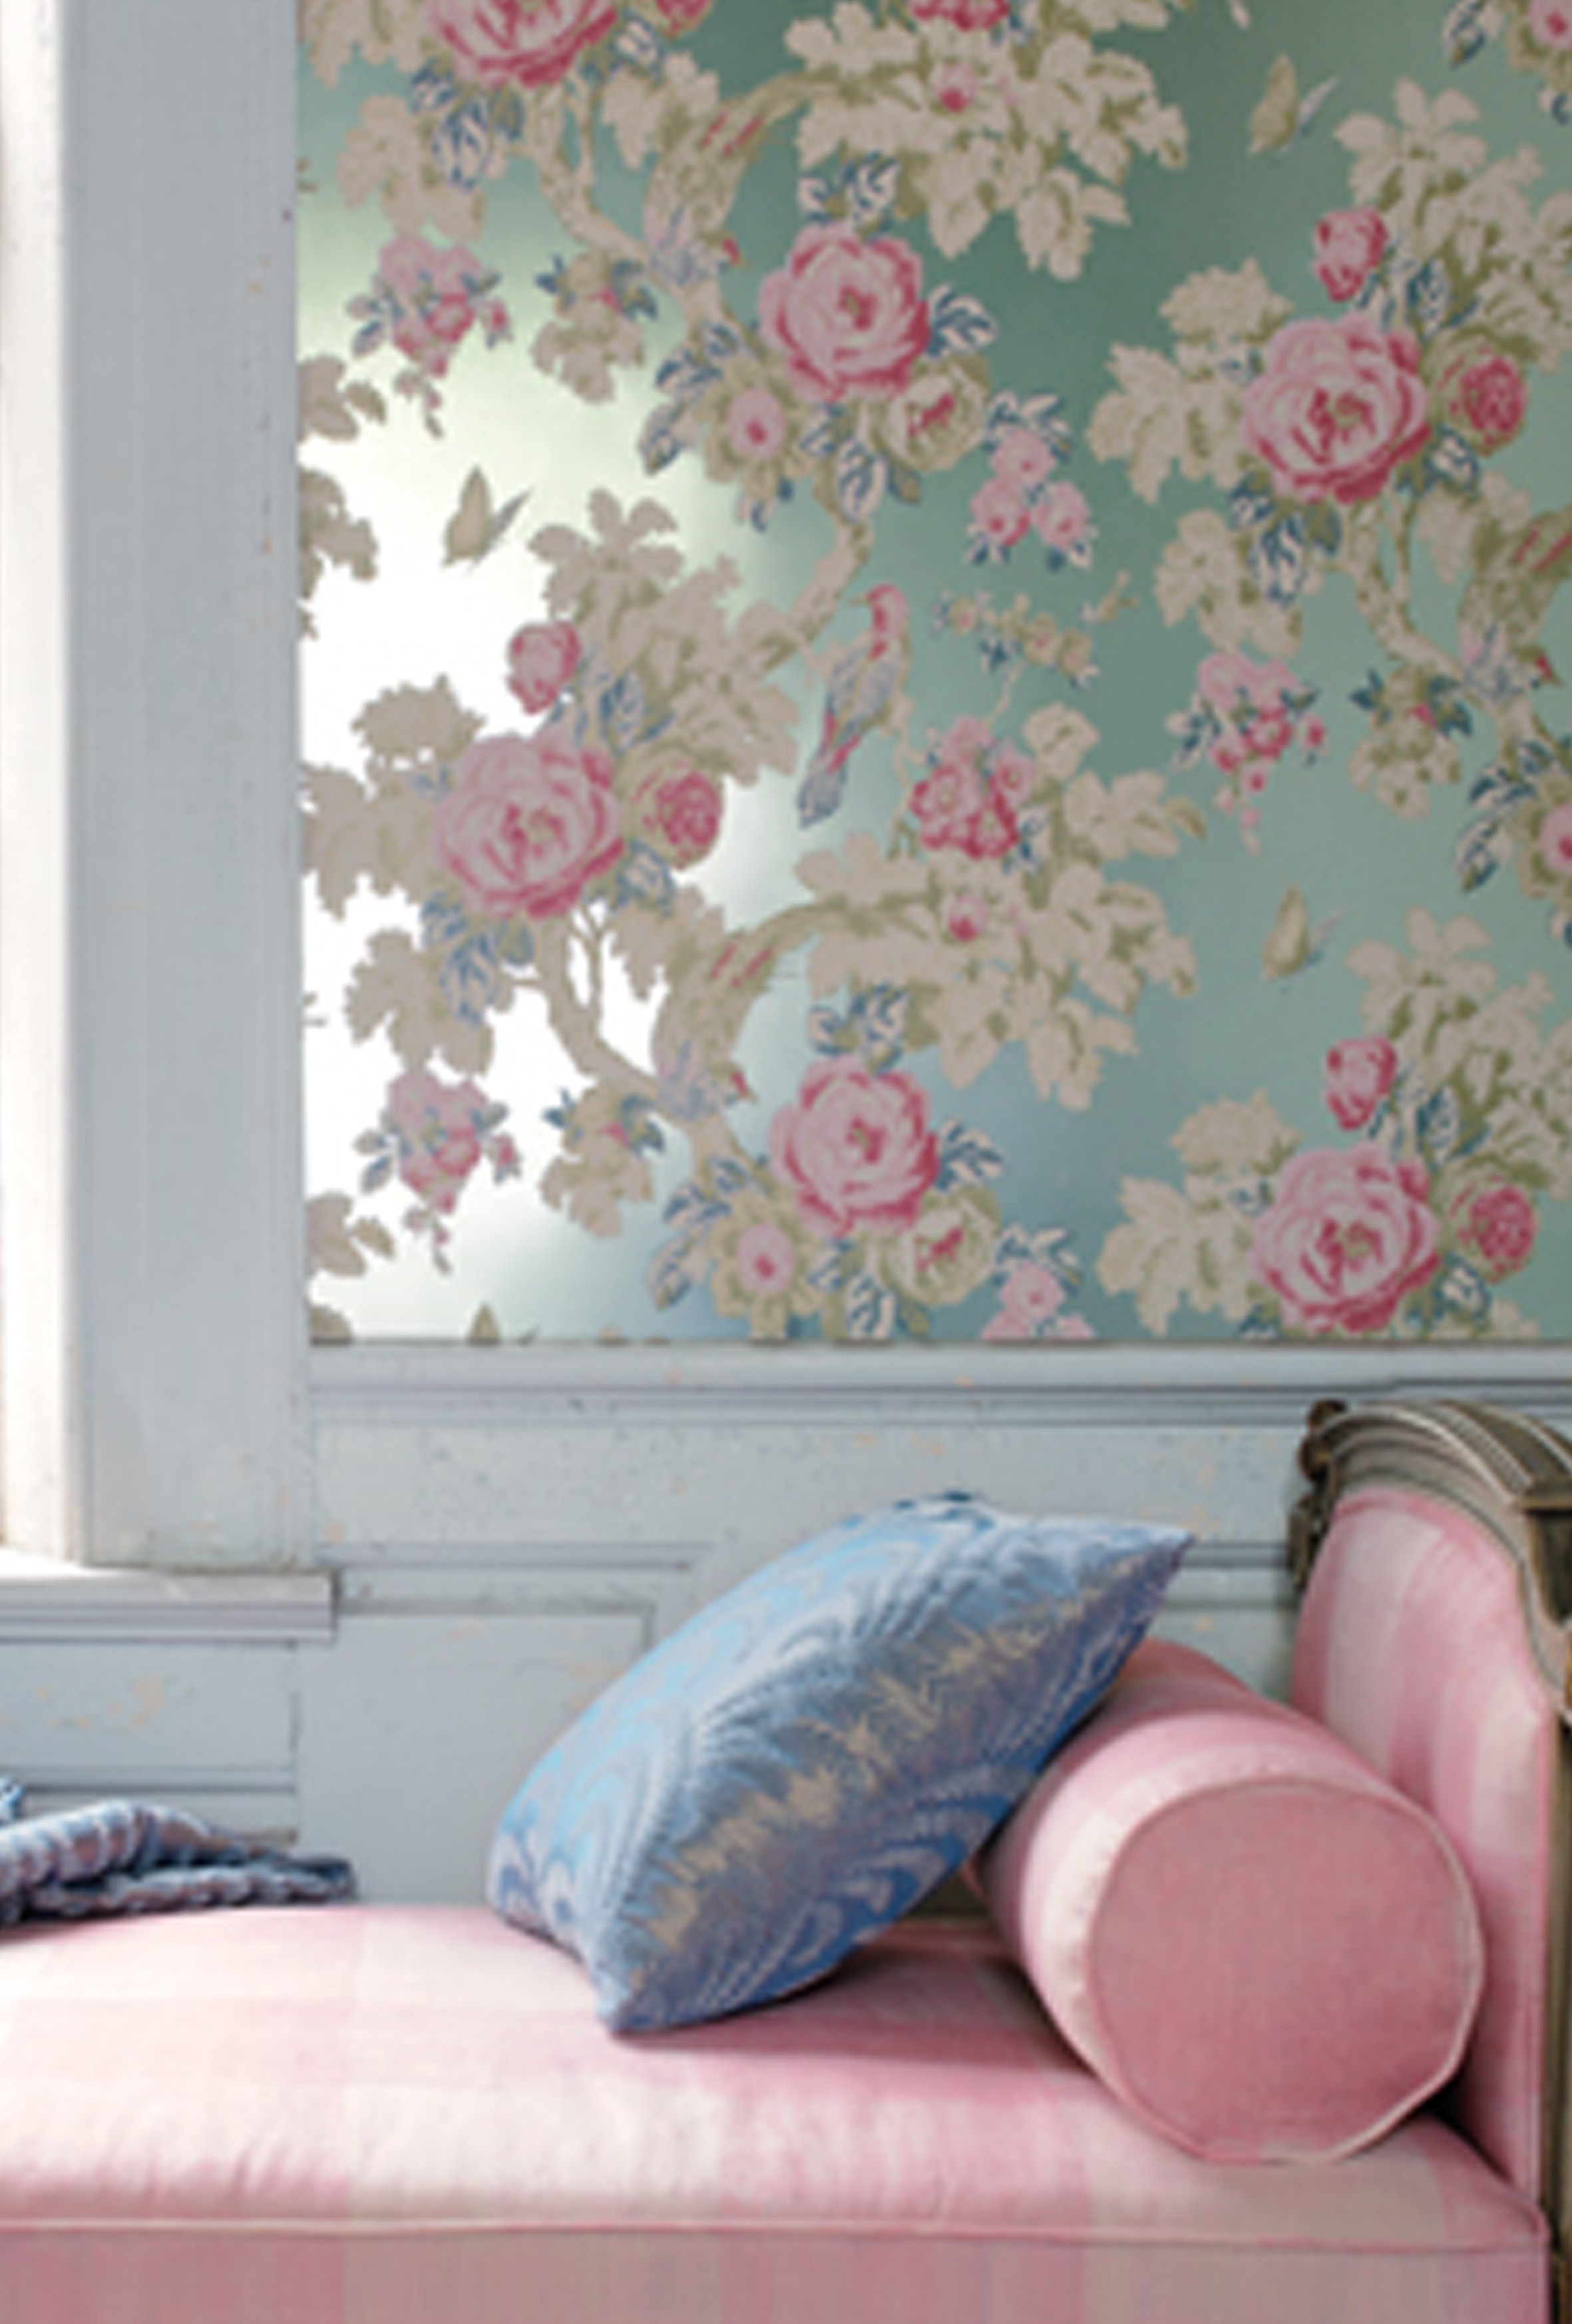 Metal Foil Background On The Anna French Bird In Bush Wallpaper